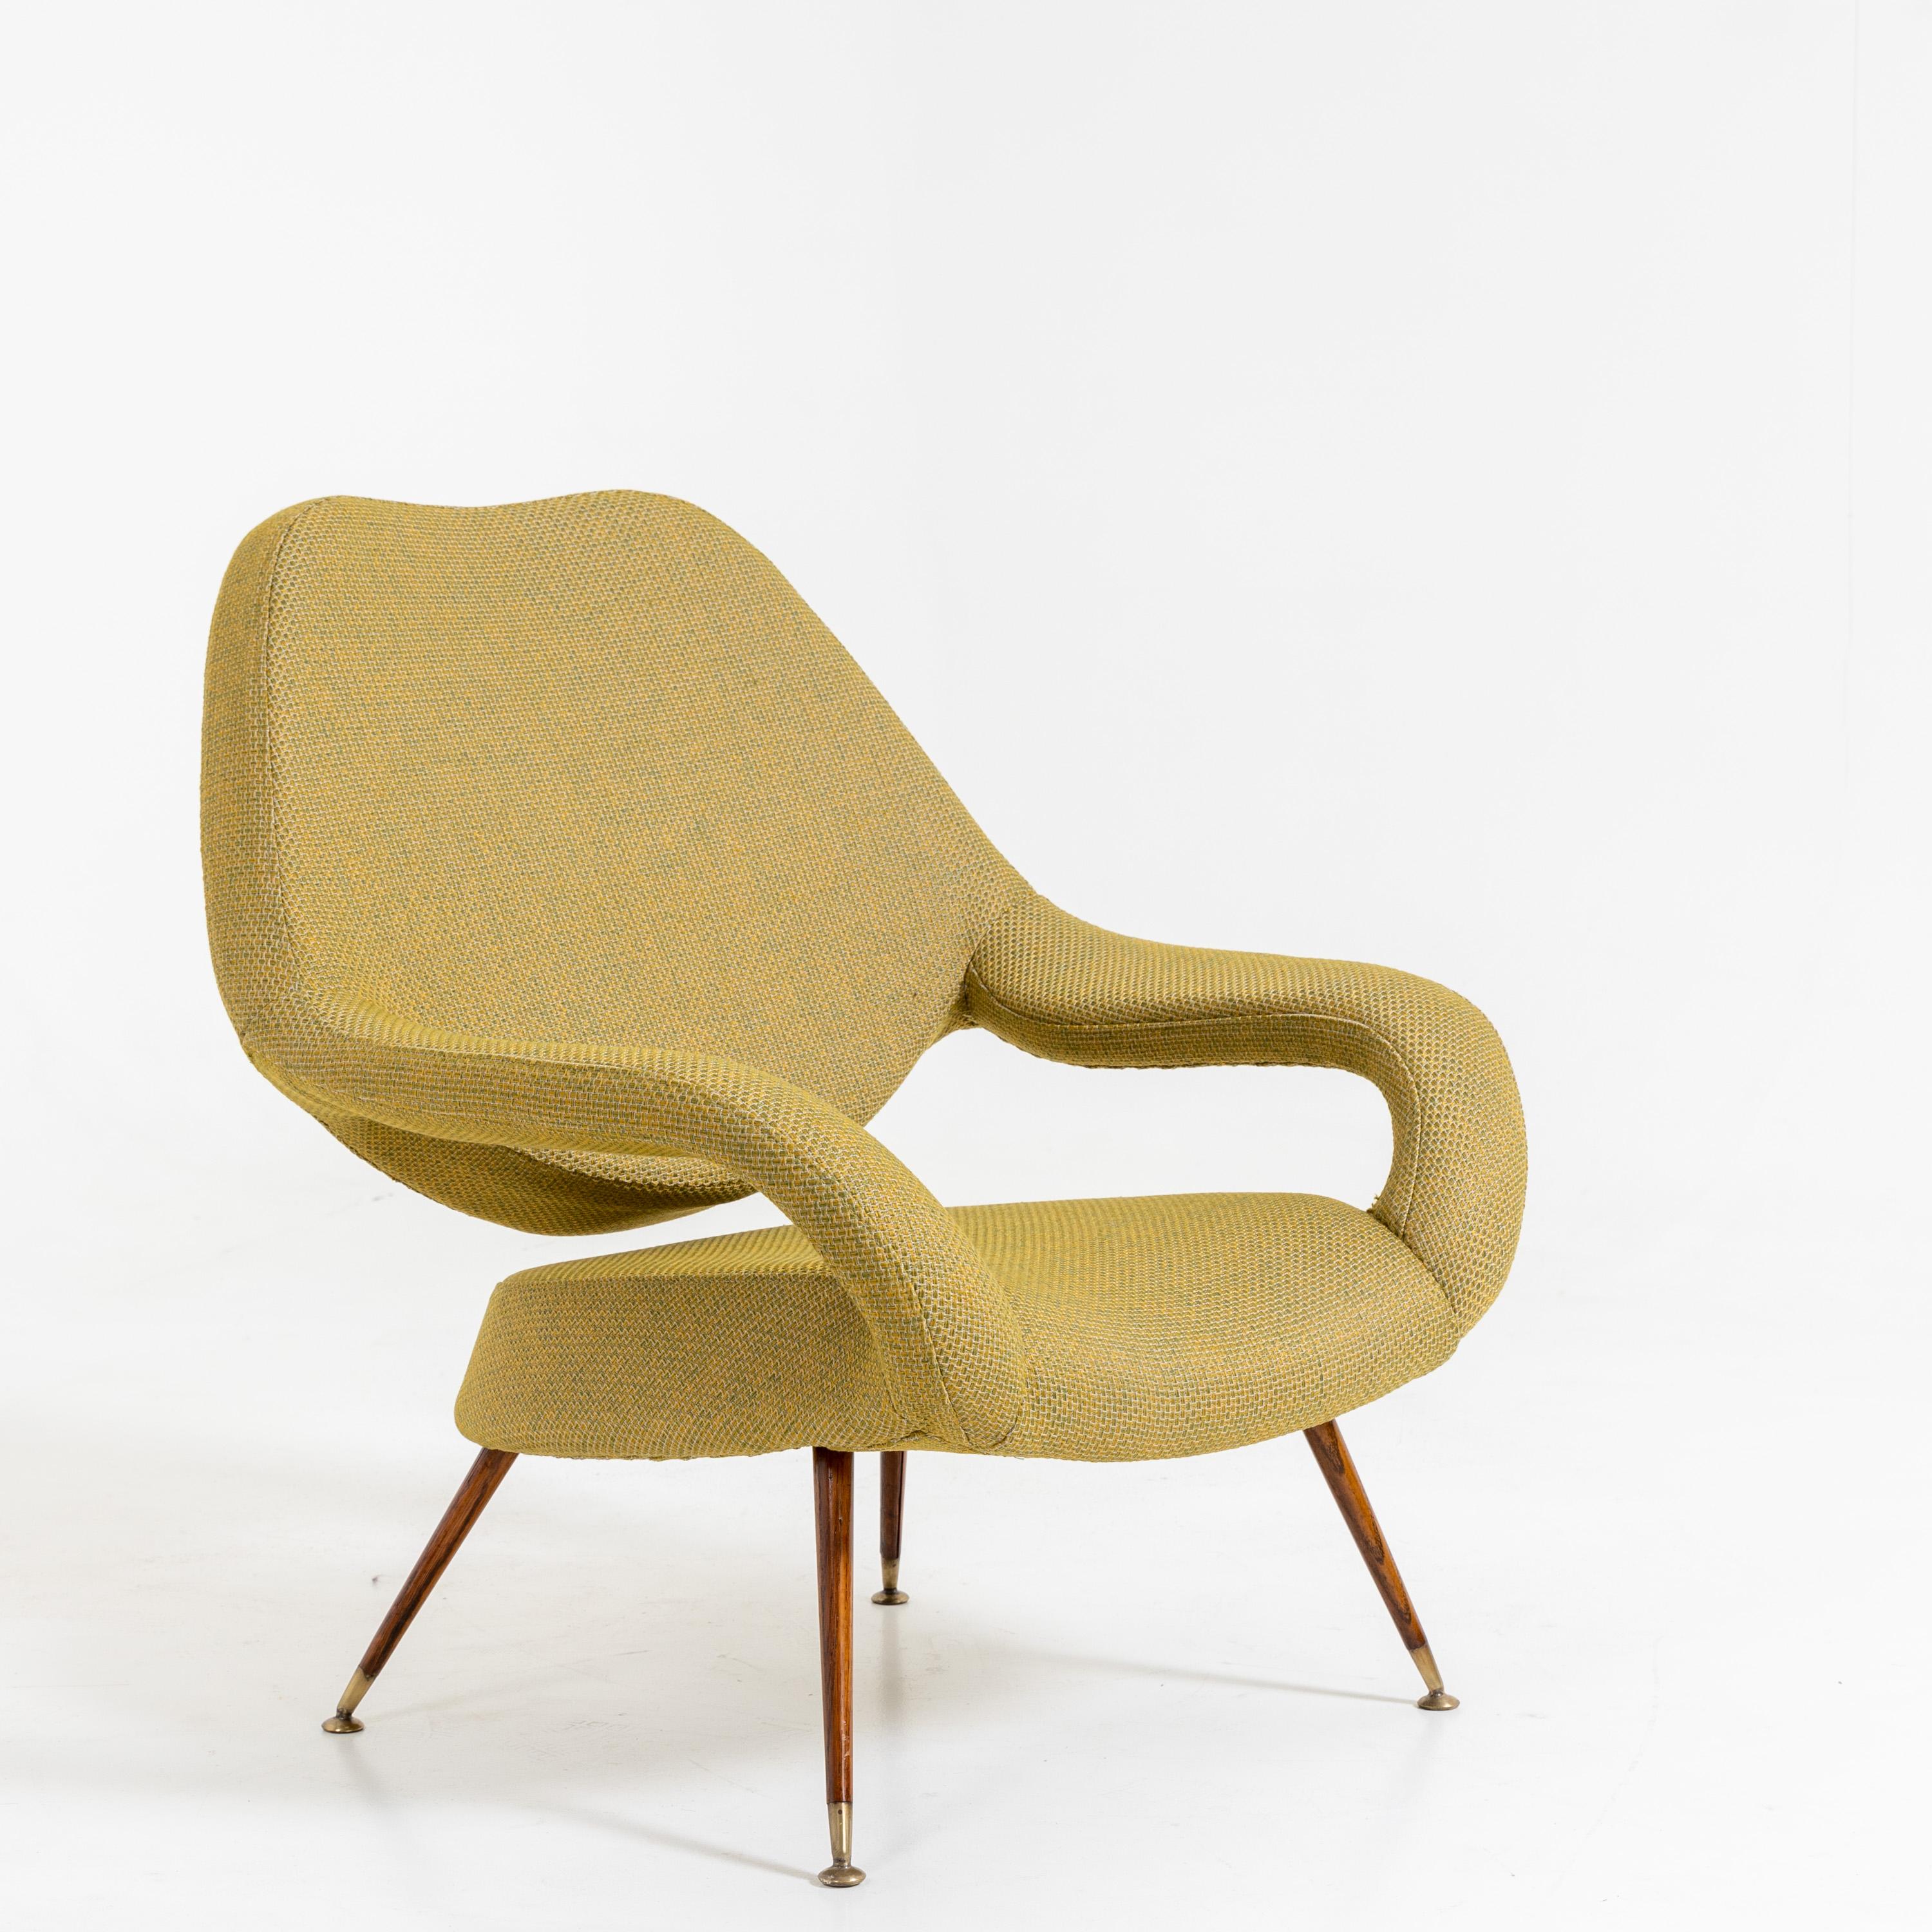 Lounge armchair on conical legs with brass sabots and green upholstery fabric, designed in 1954 by Gastone Rinaldi for Rima.